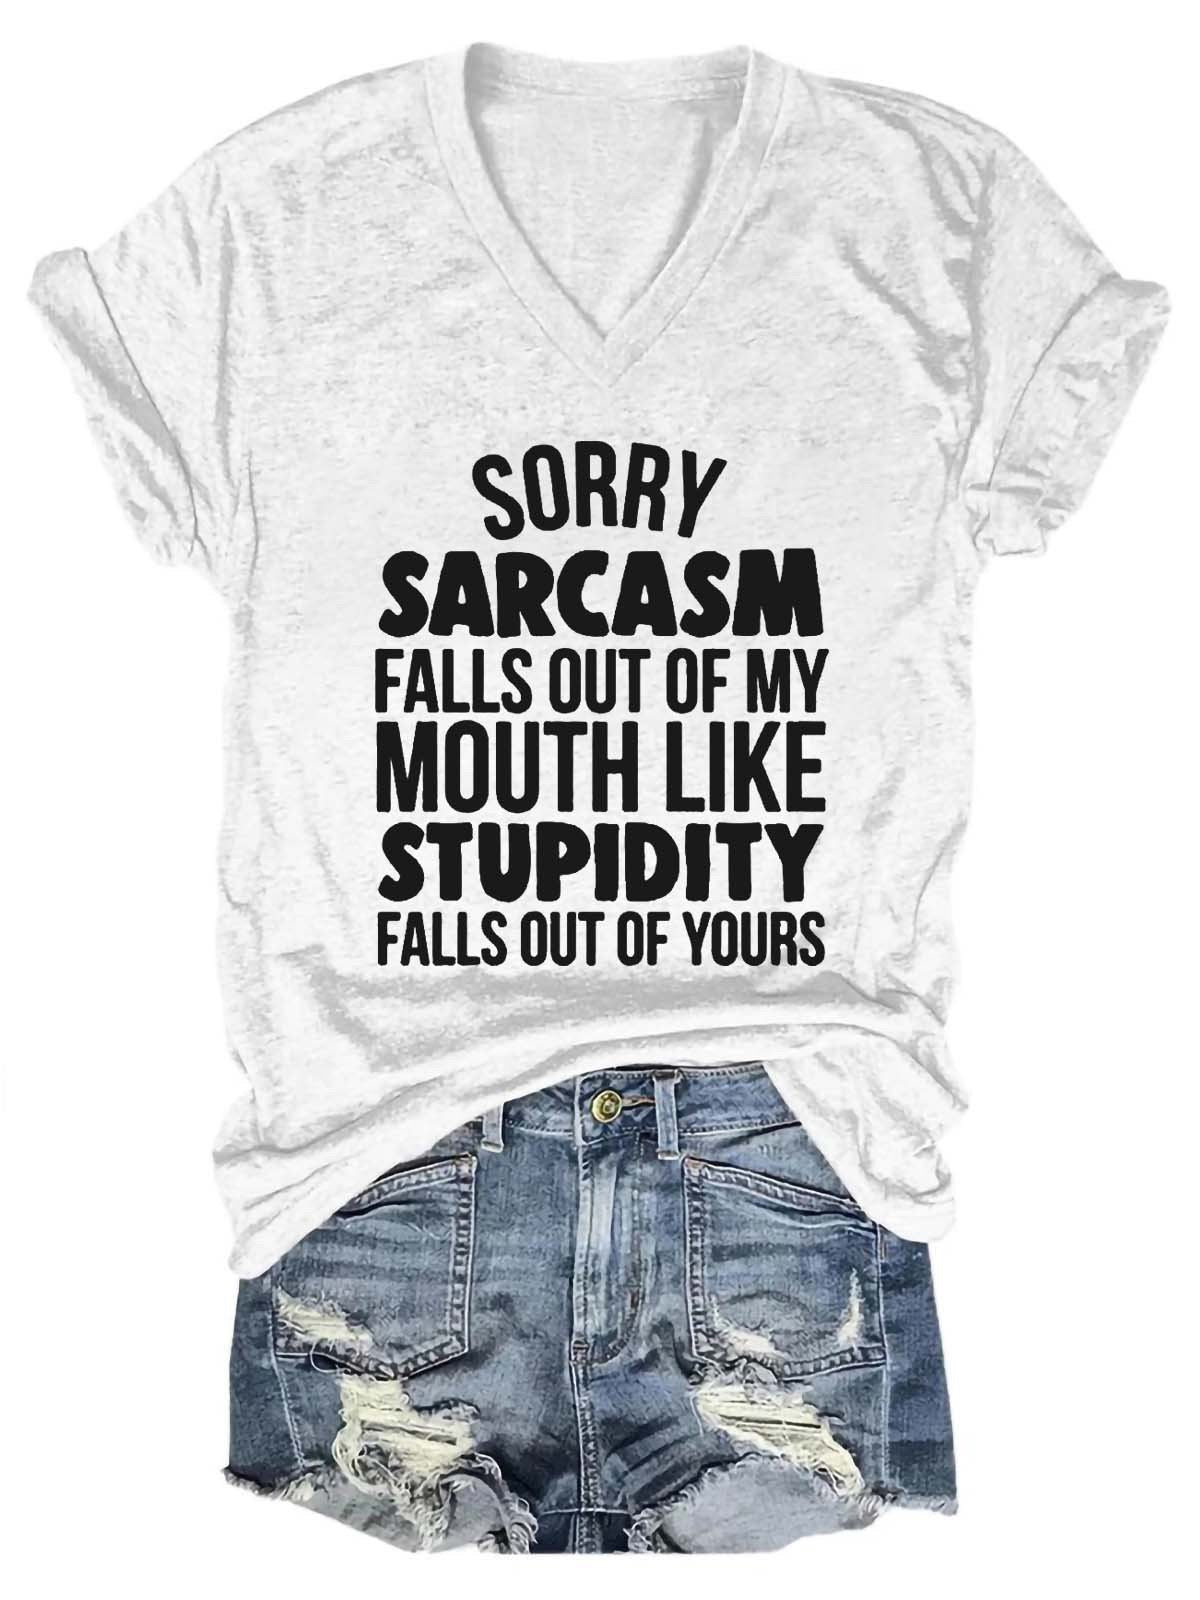 Women's Sorry Sarcasm Falls Out Of My Mouth T-Shirt V-Neck T-Shirt - Outlets Forever